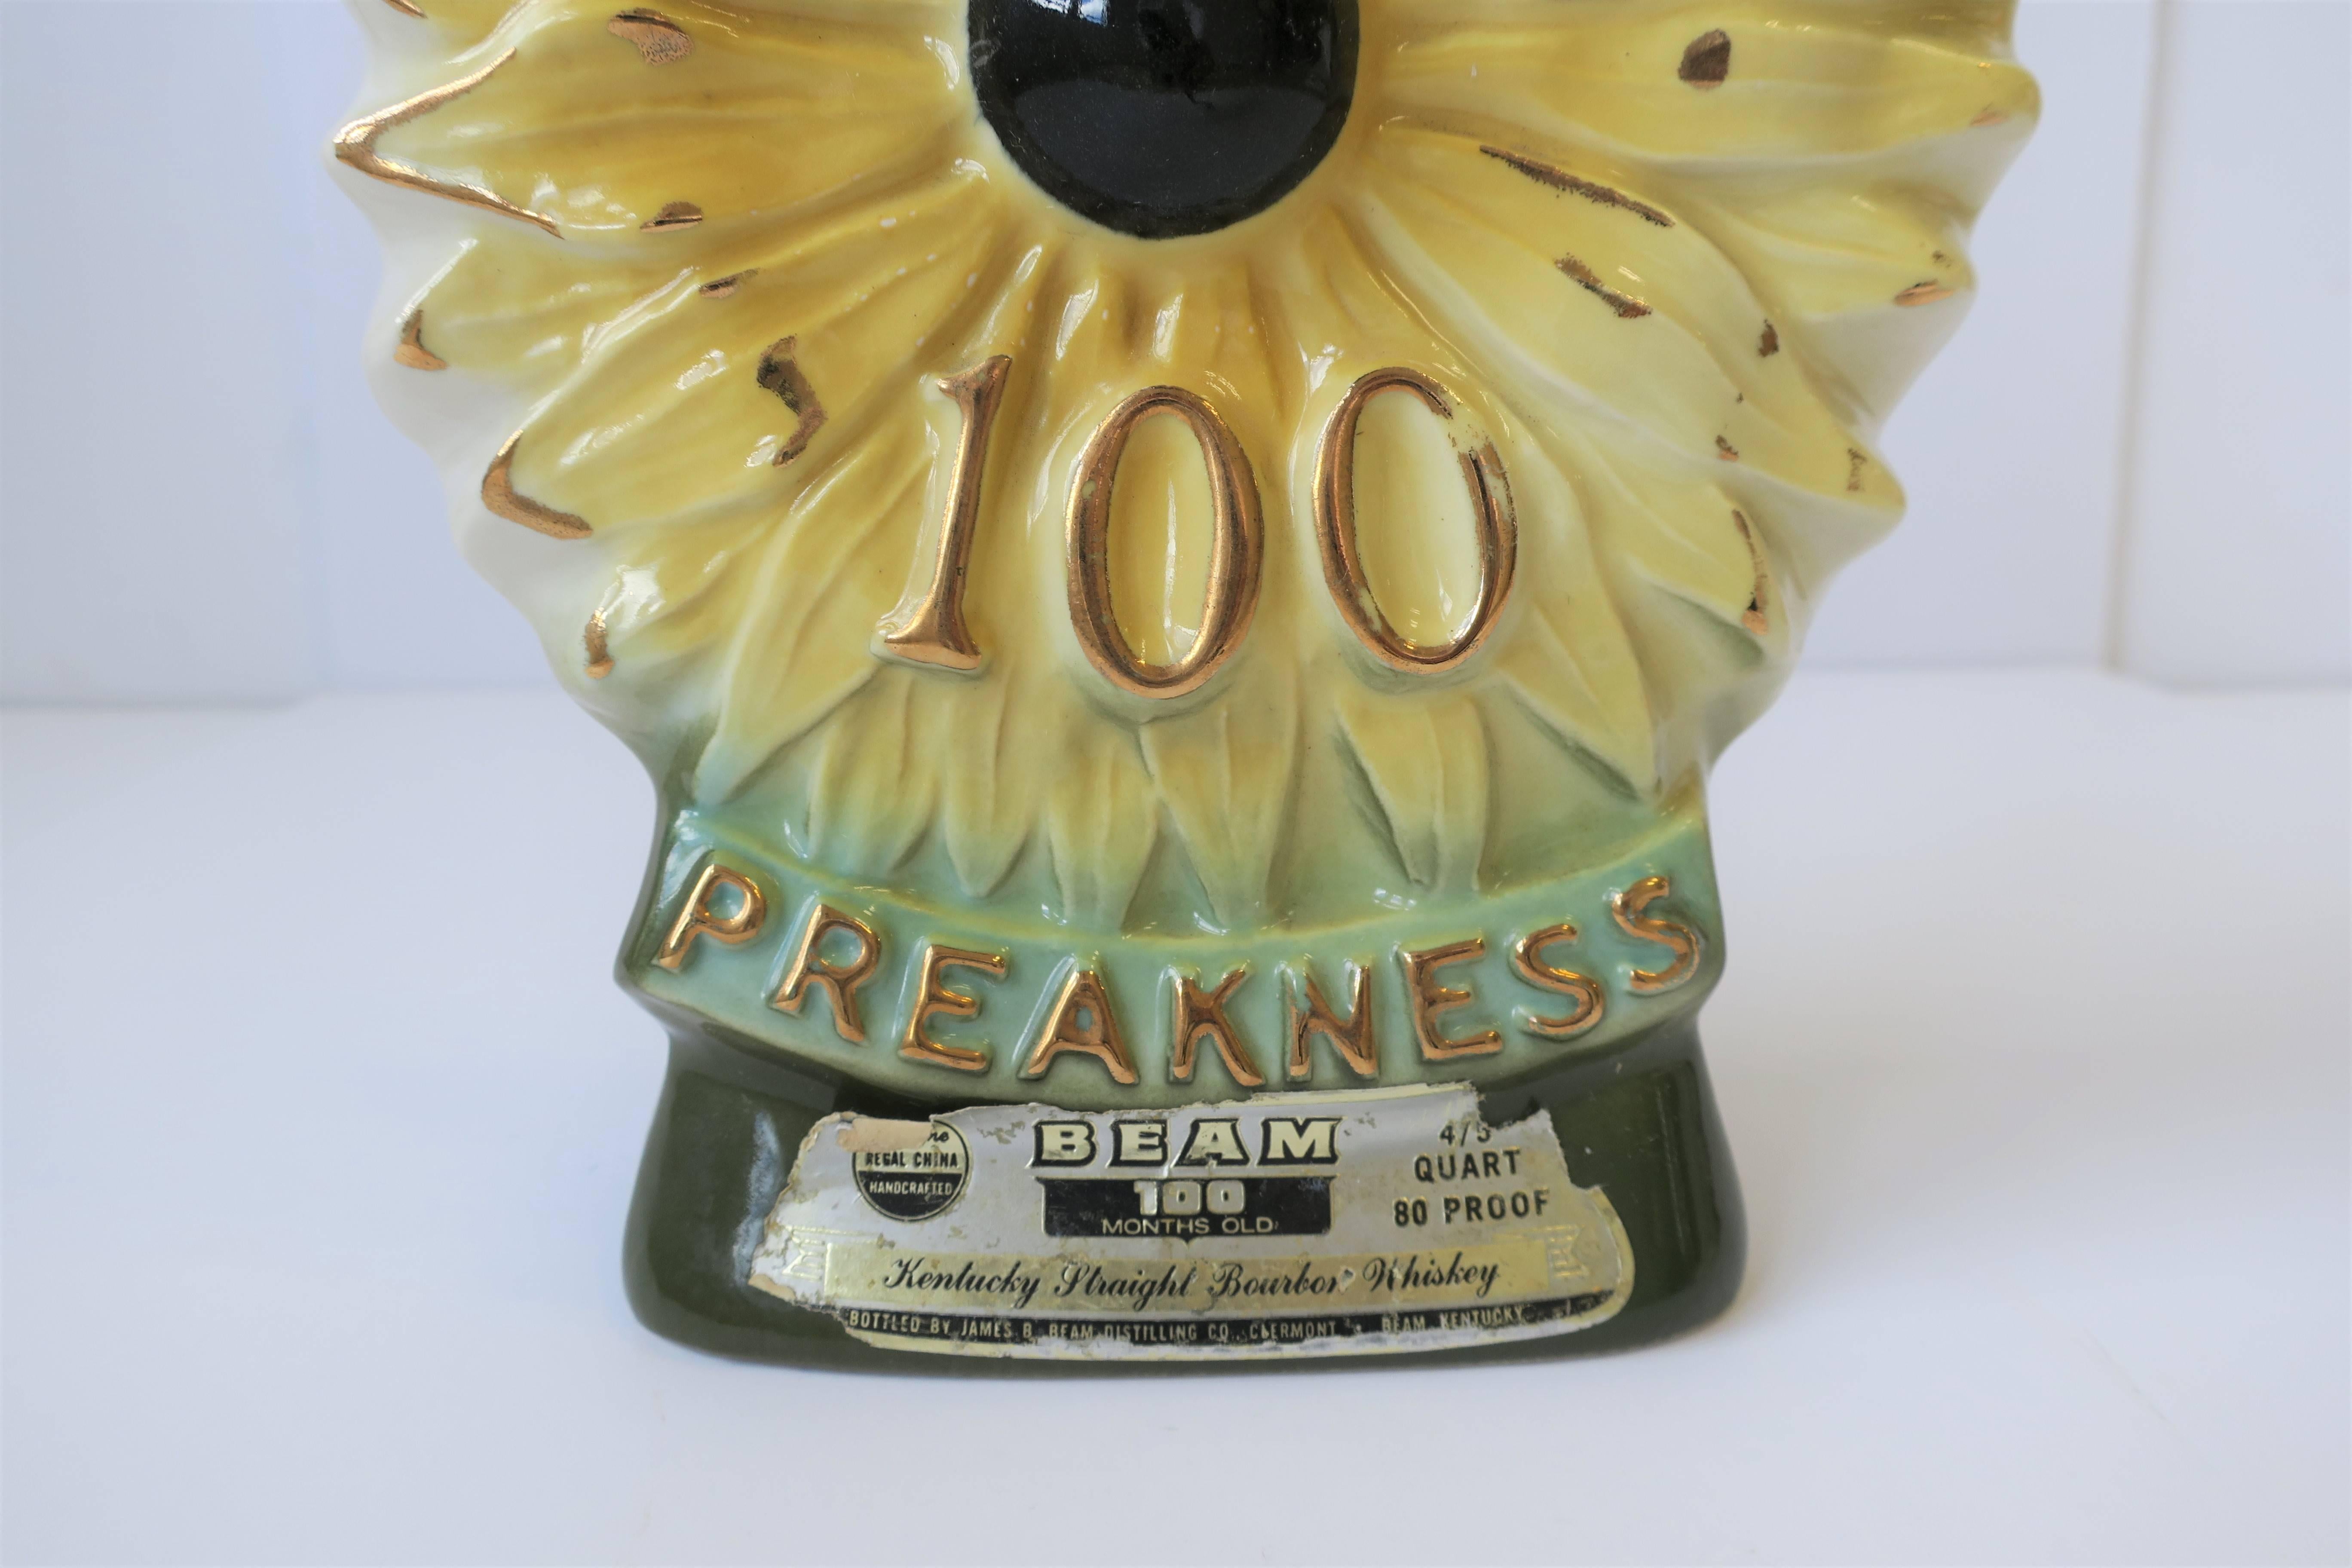 American Vintage Horse Racing Preakness Stakes Decanter Liquor or Spirits Bottle, 1975